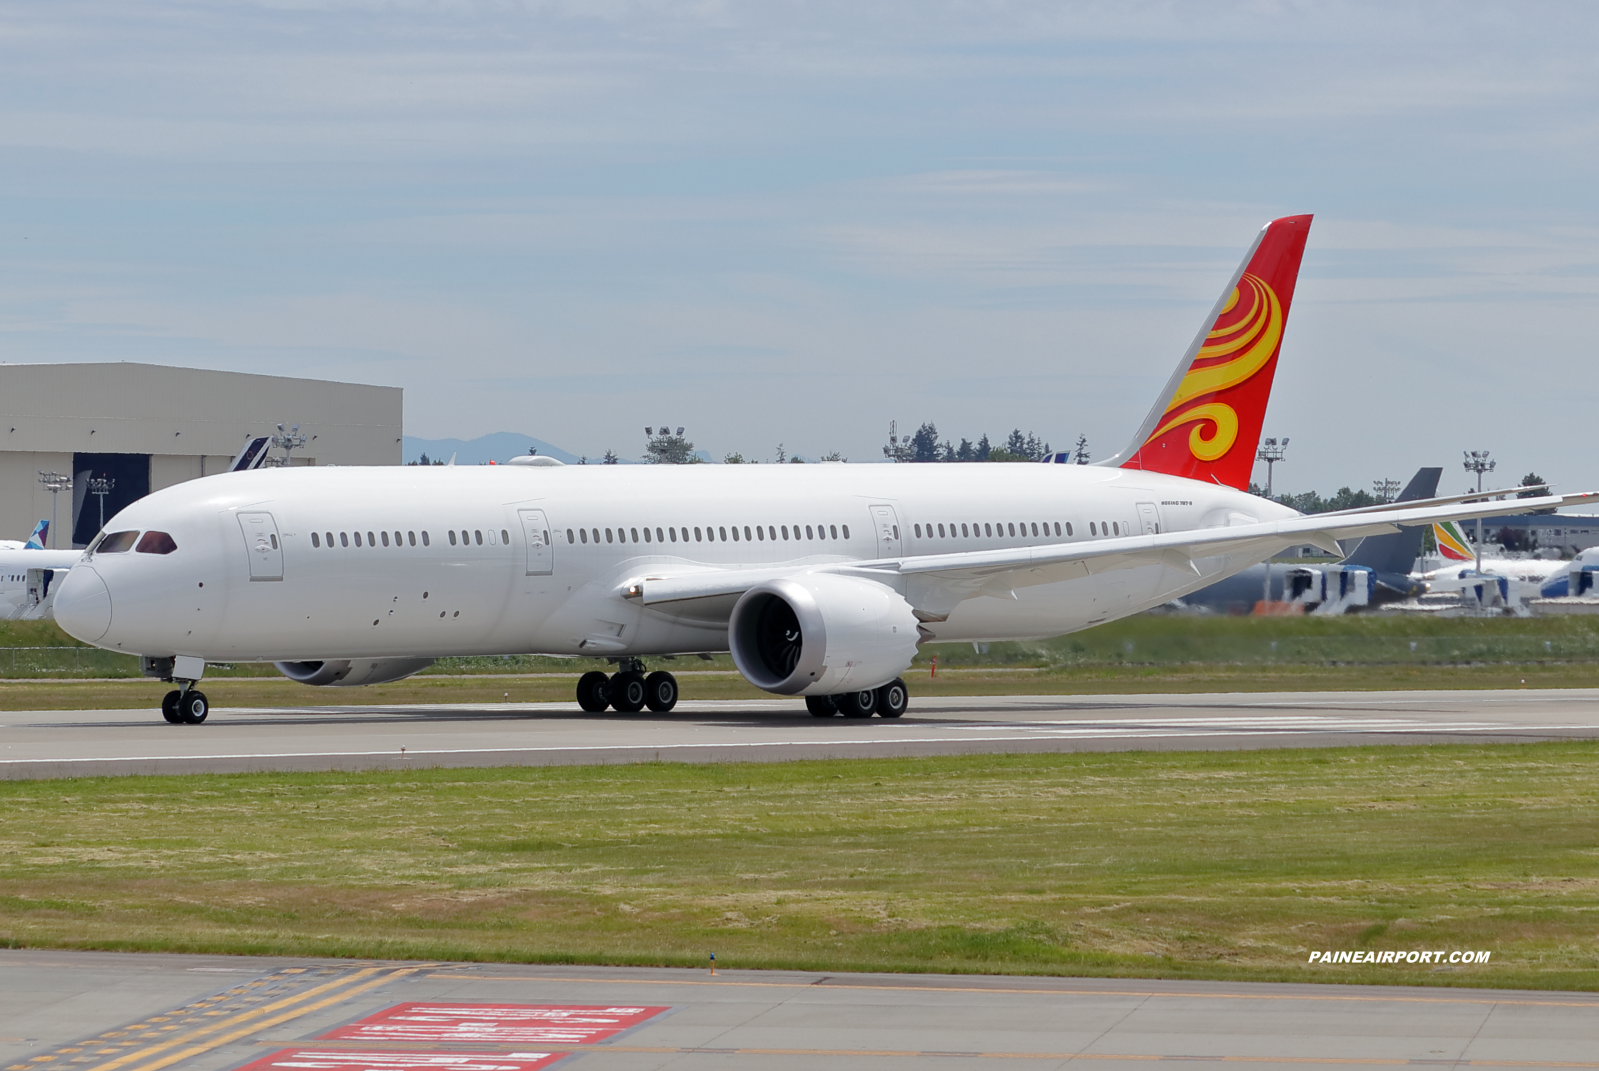 ZB806 787-9 line 887 at Paine Field